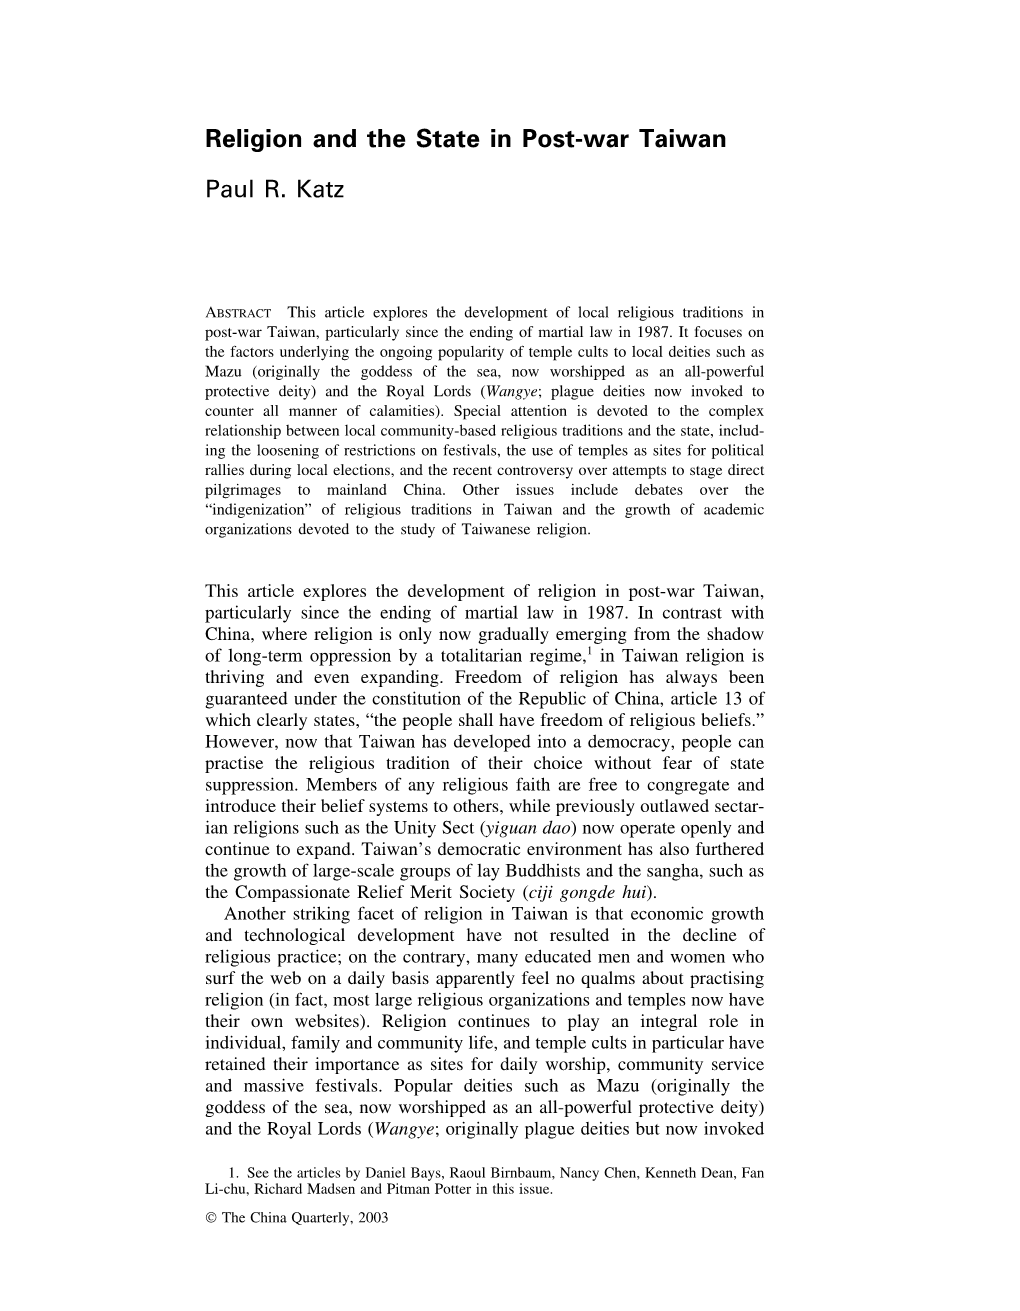 Religion and the State in Post-War Taiwan Paul R. Katz